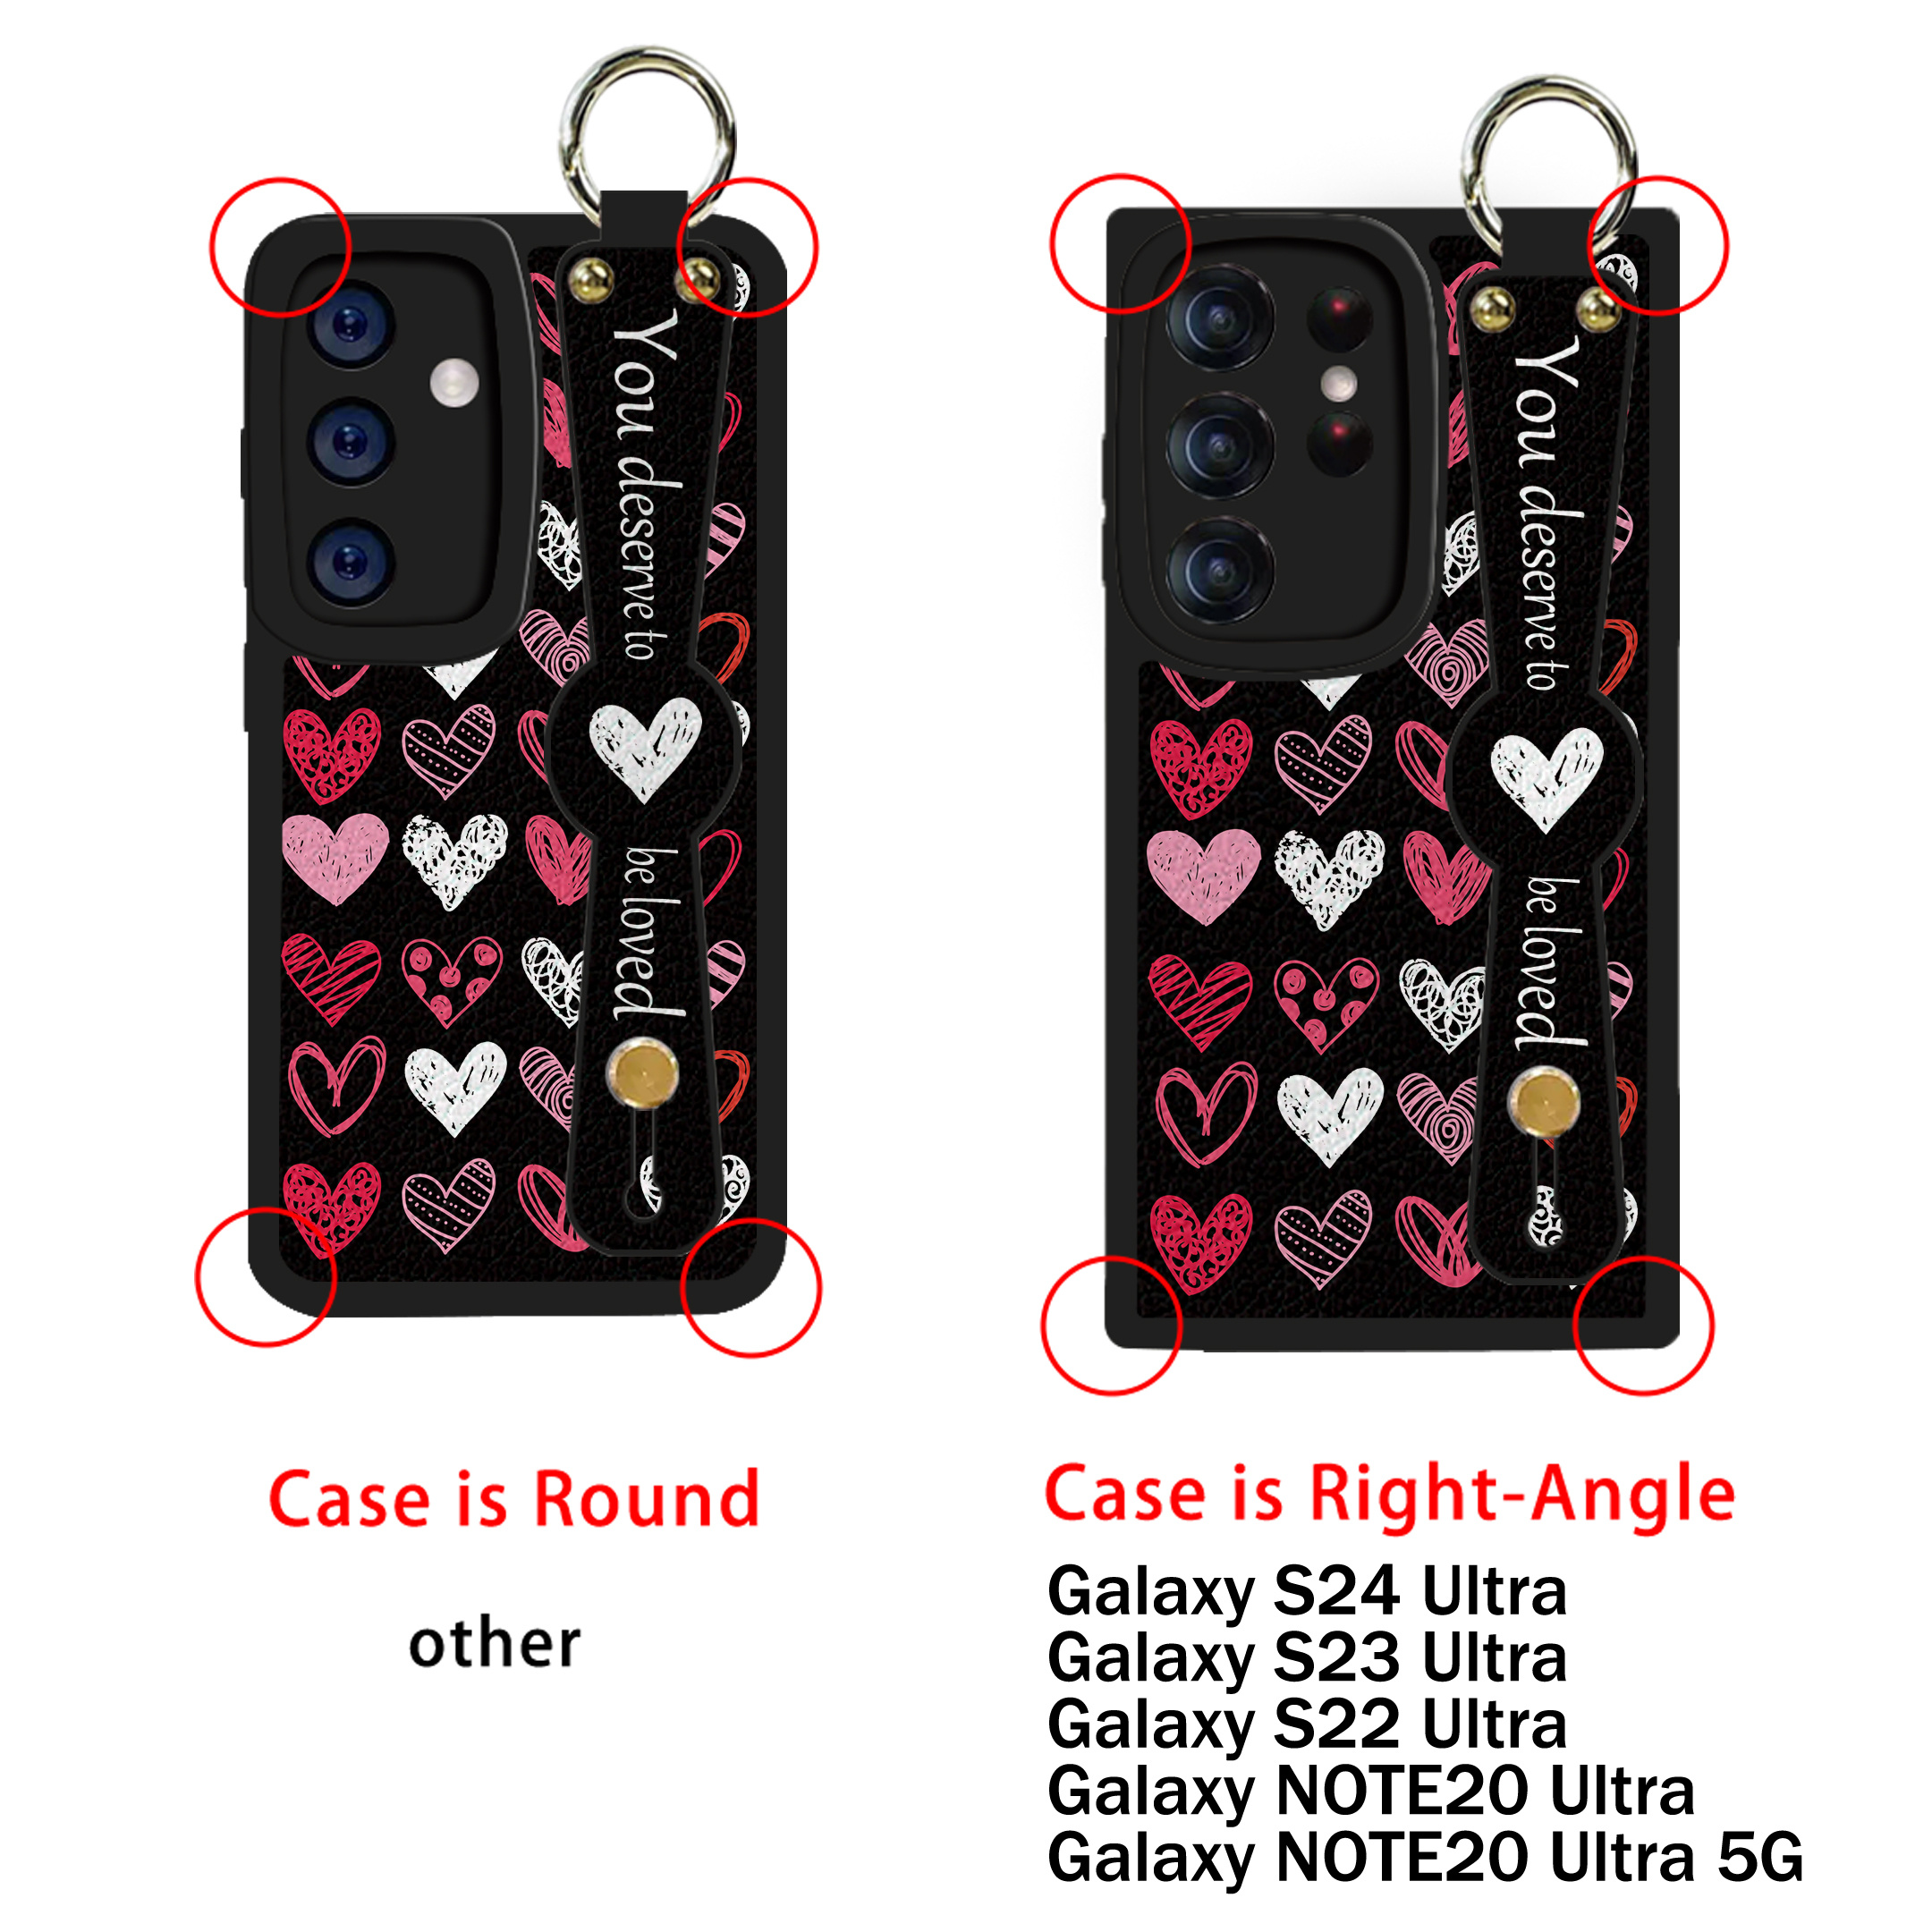 

Heart Patterned Tpu Phone Case With Holder For Iphone 15/14/13/12/11 Models & Samsung Galaxy S24/s23/s22 Series - Matte Finish, Shockproof With Air Cushion, Drop Protection Up To 6.6 Feet